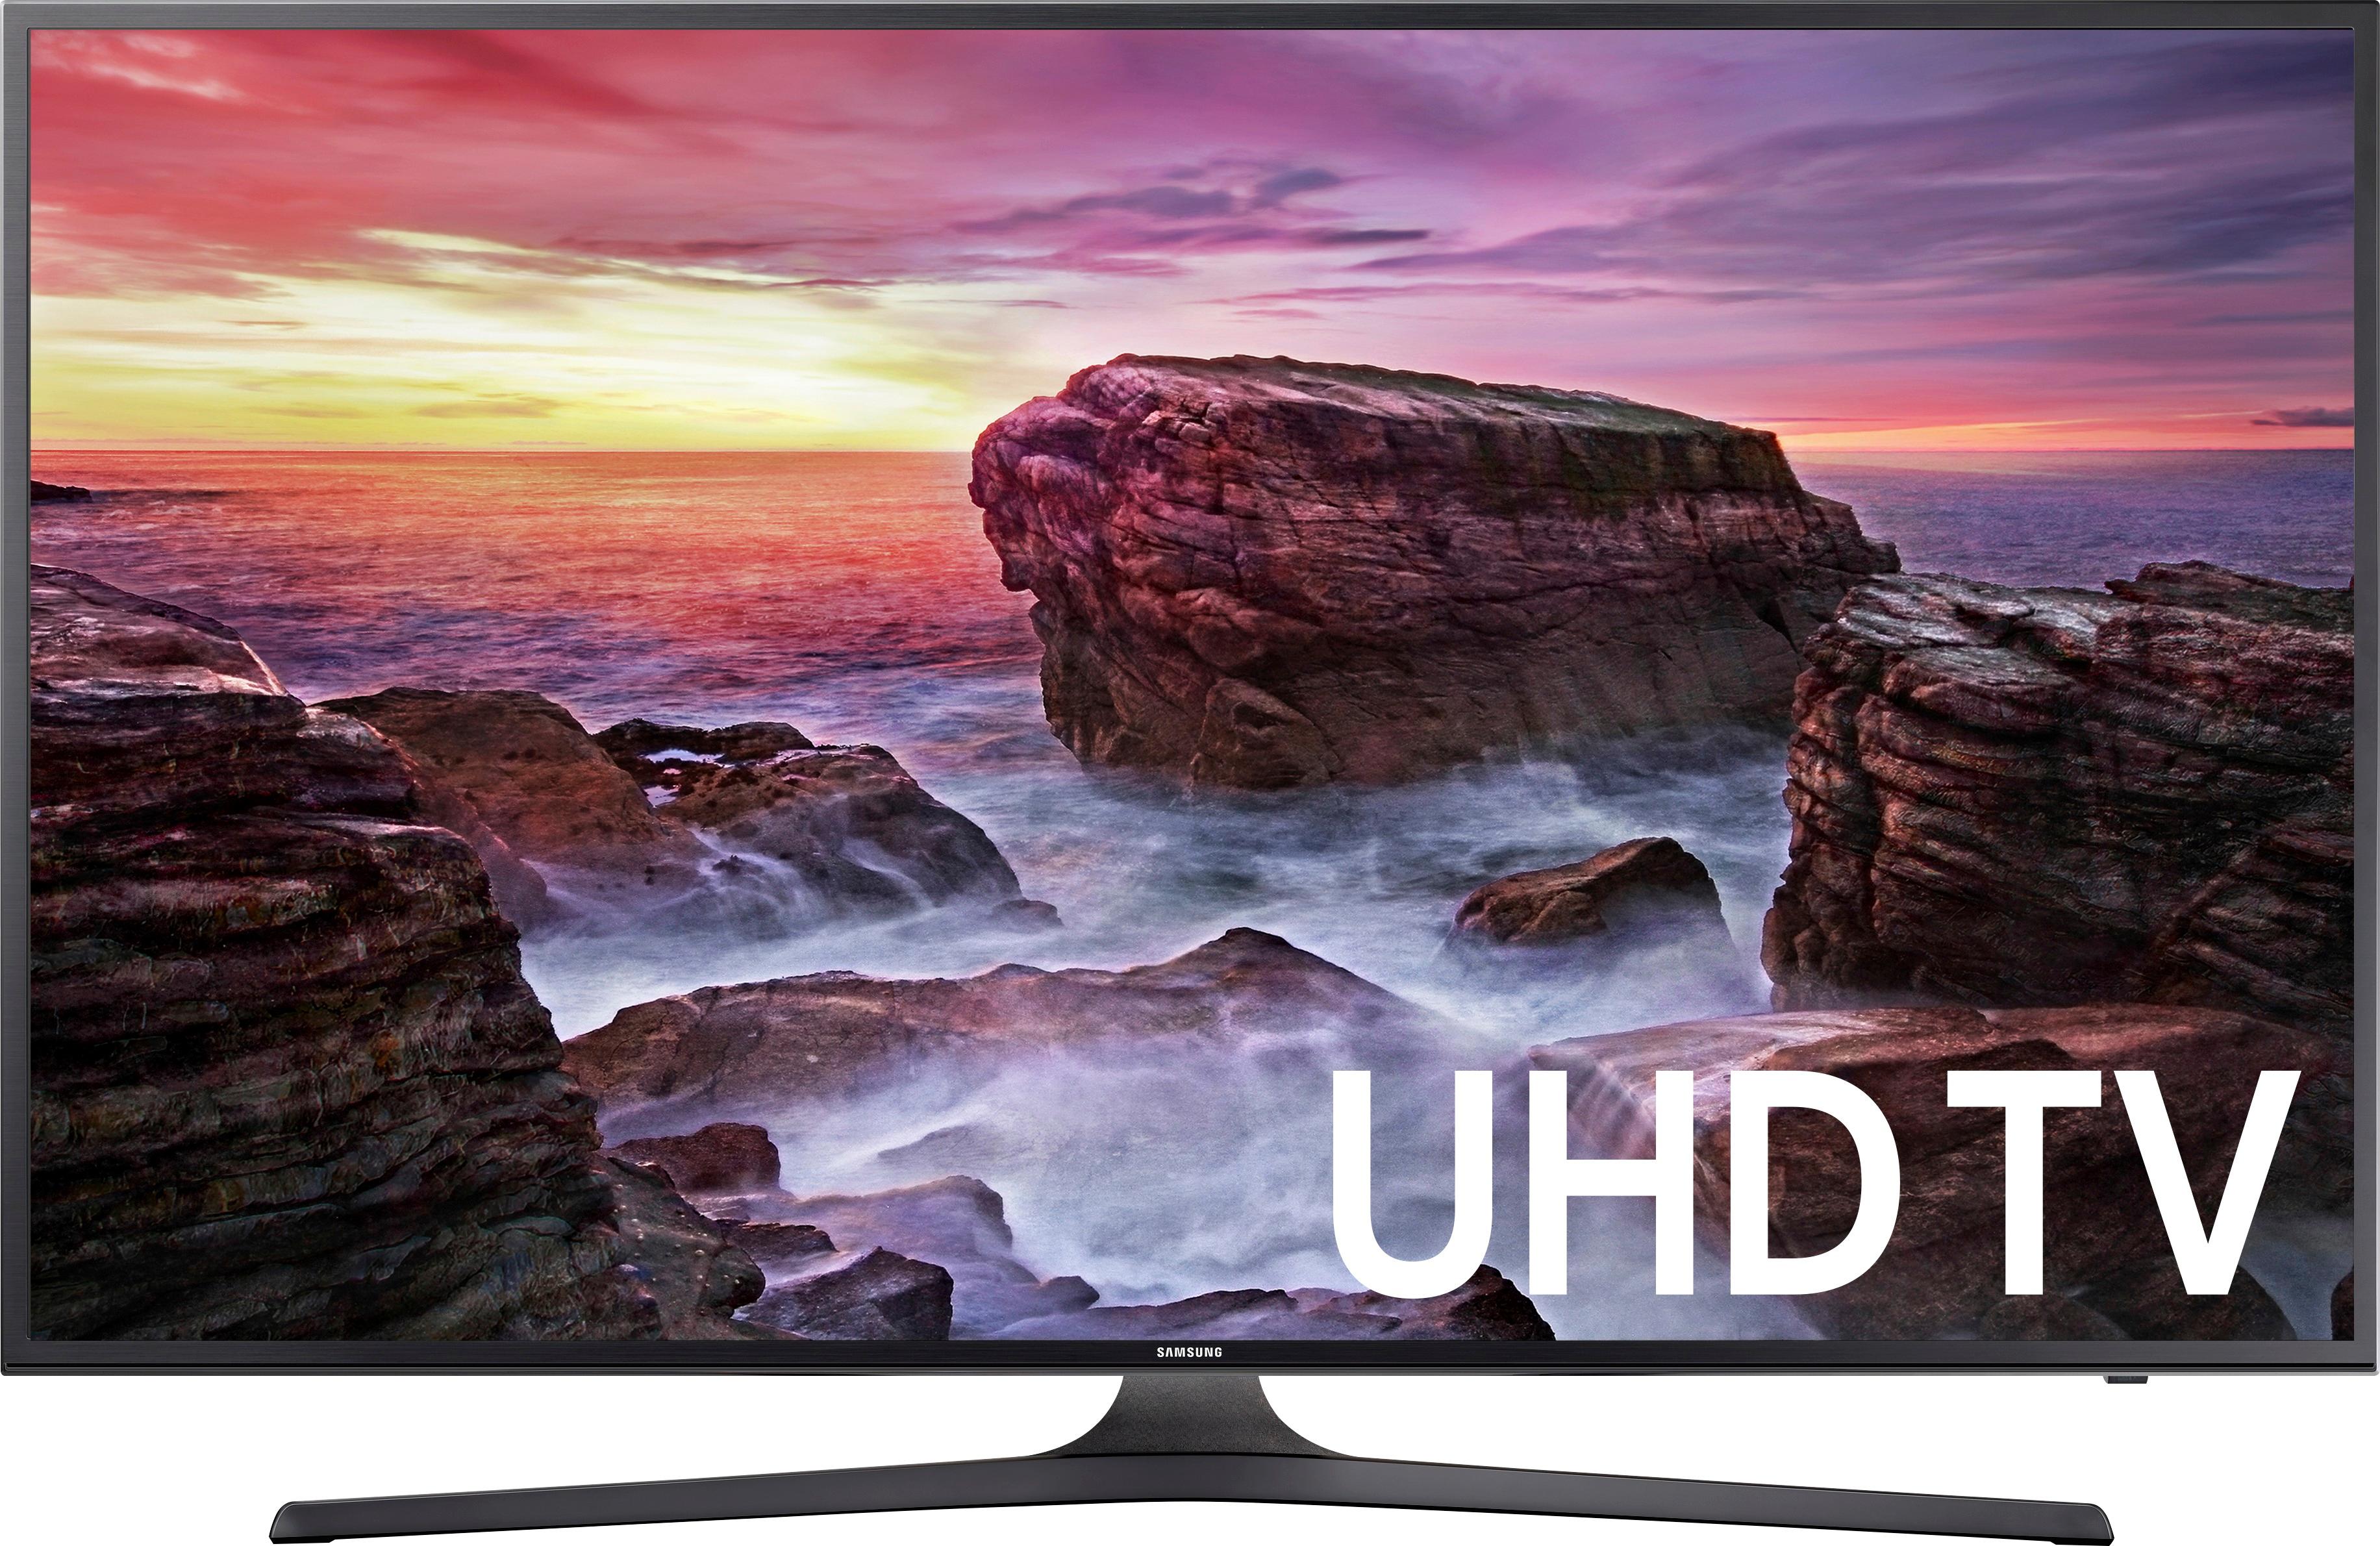 Questions And Answers Samsung 50 Class Led Mu6070 Series 2160p Smart 4k Ultra Hd Tv With Hdr 1862